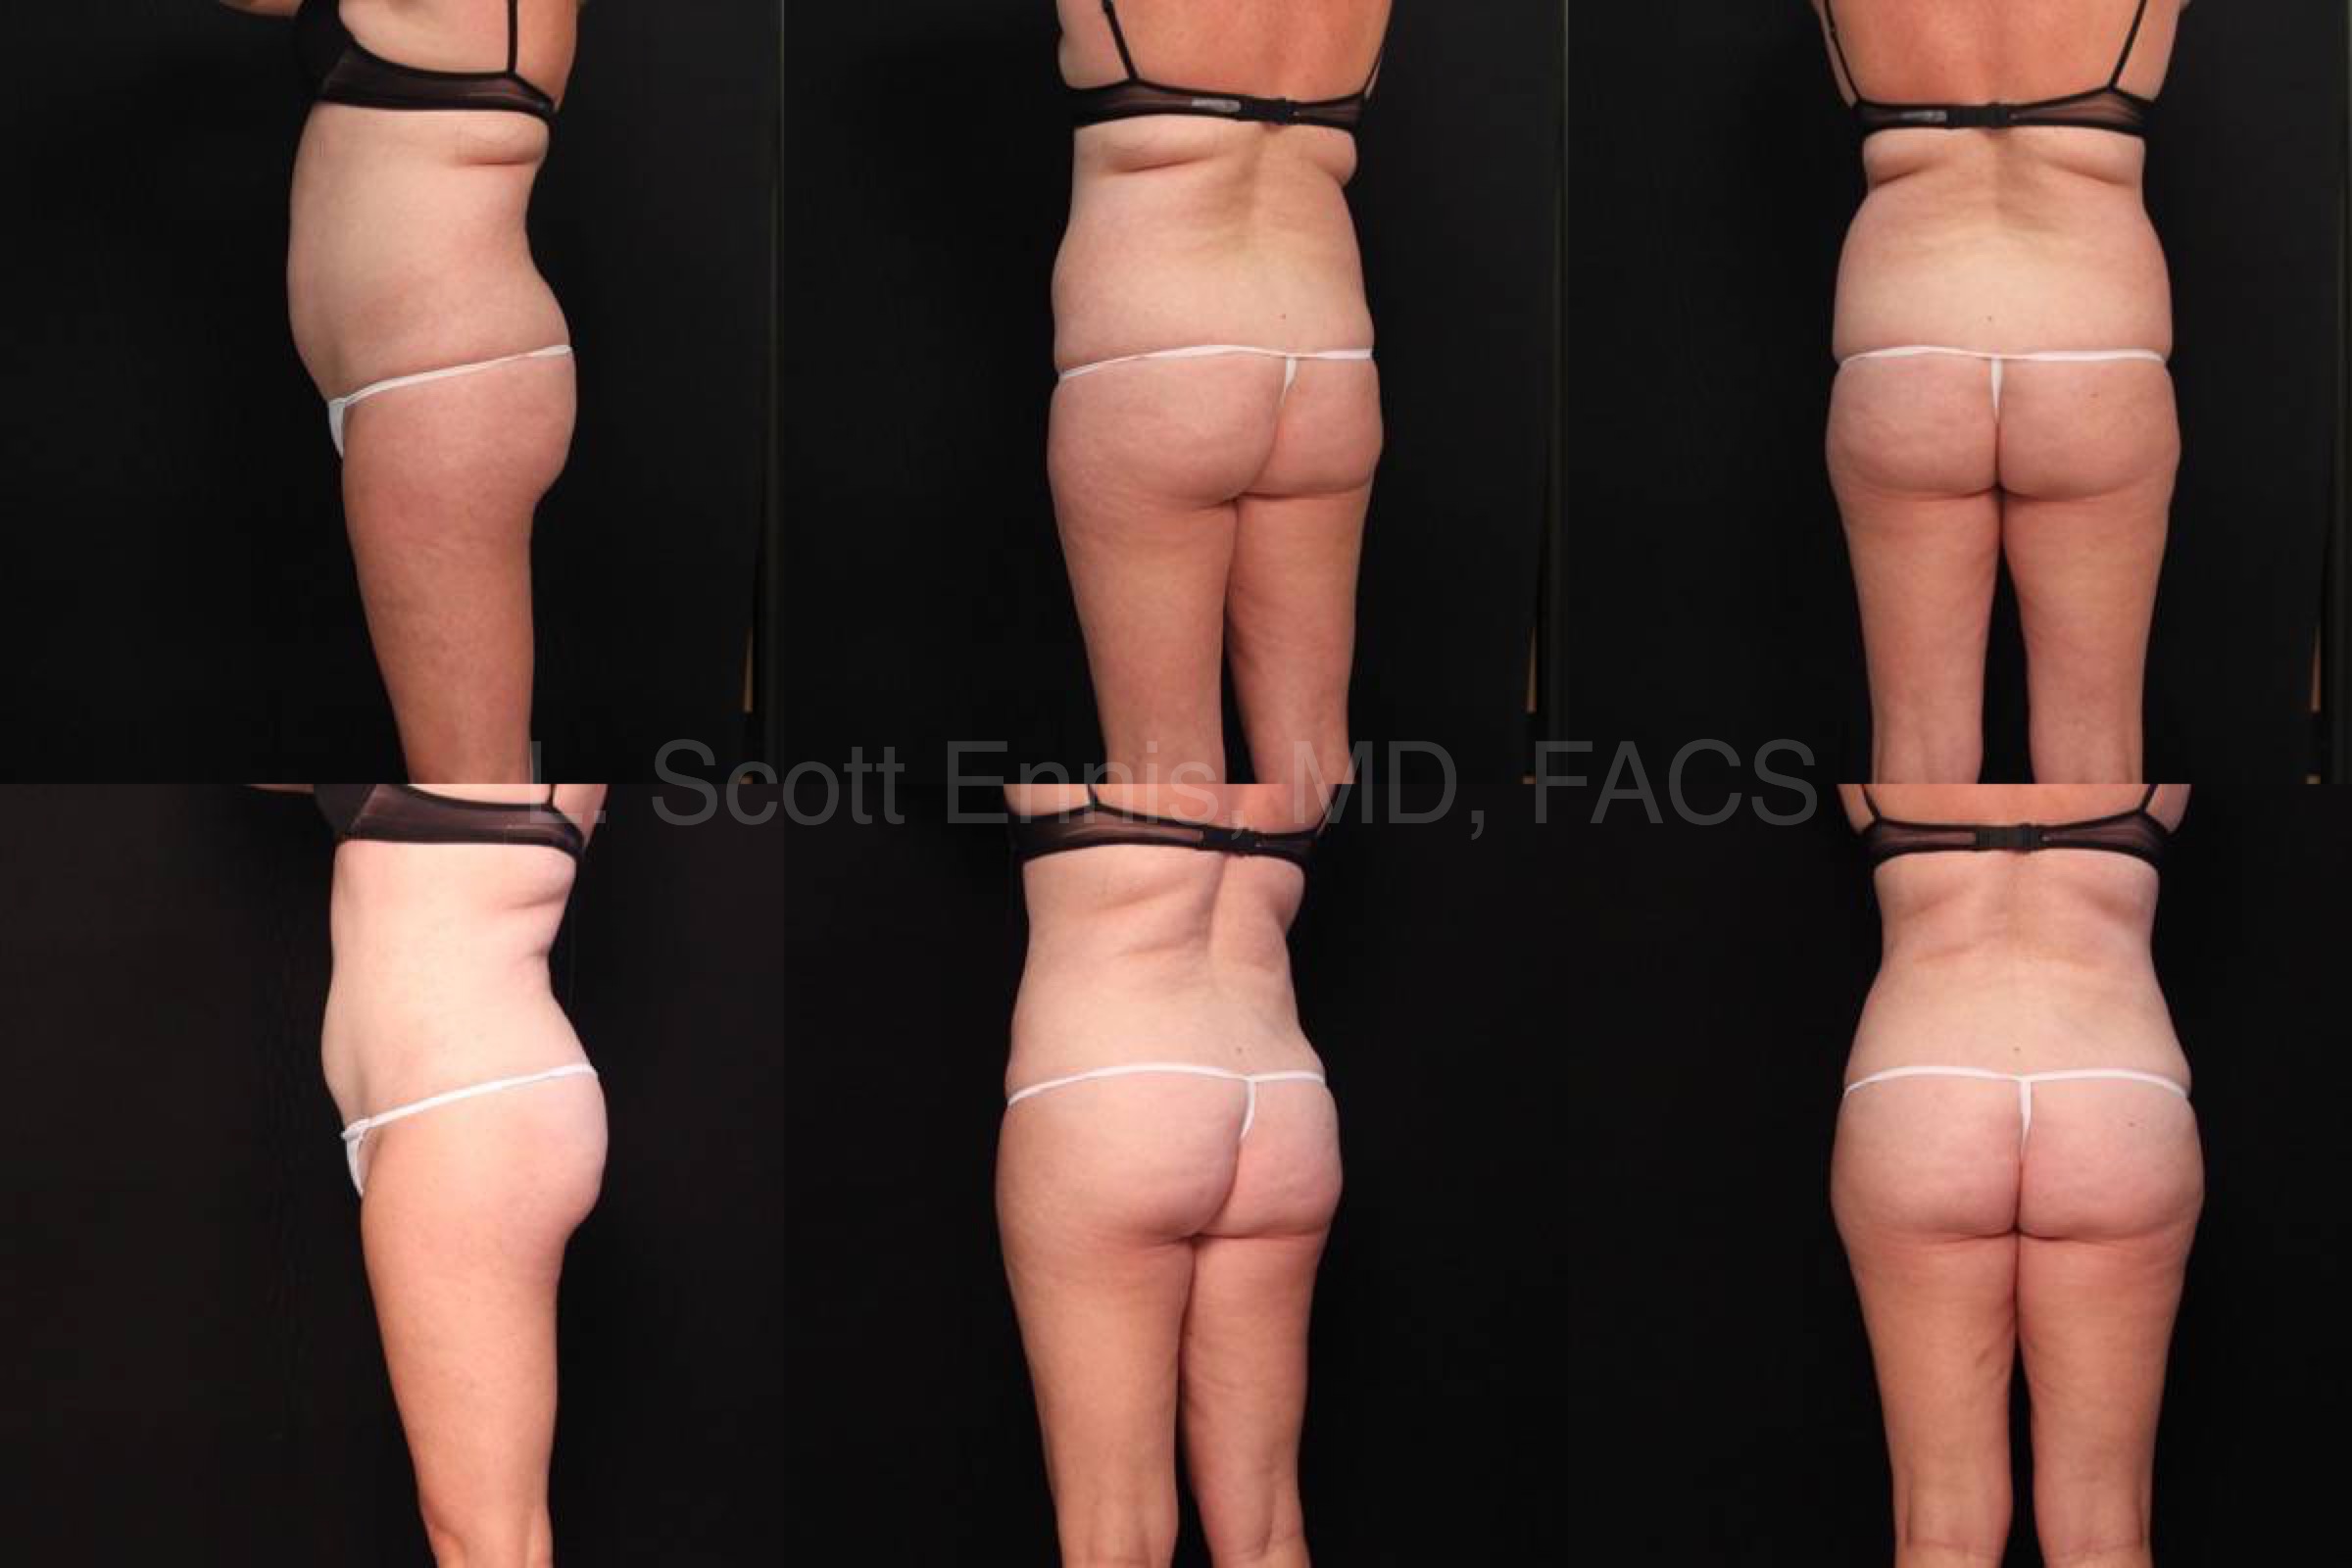 Liposuction of Abdomen and Hips Before and After Ennis Plastic Surgery Palm Beach Boca Raton Destin Miami